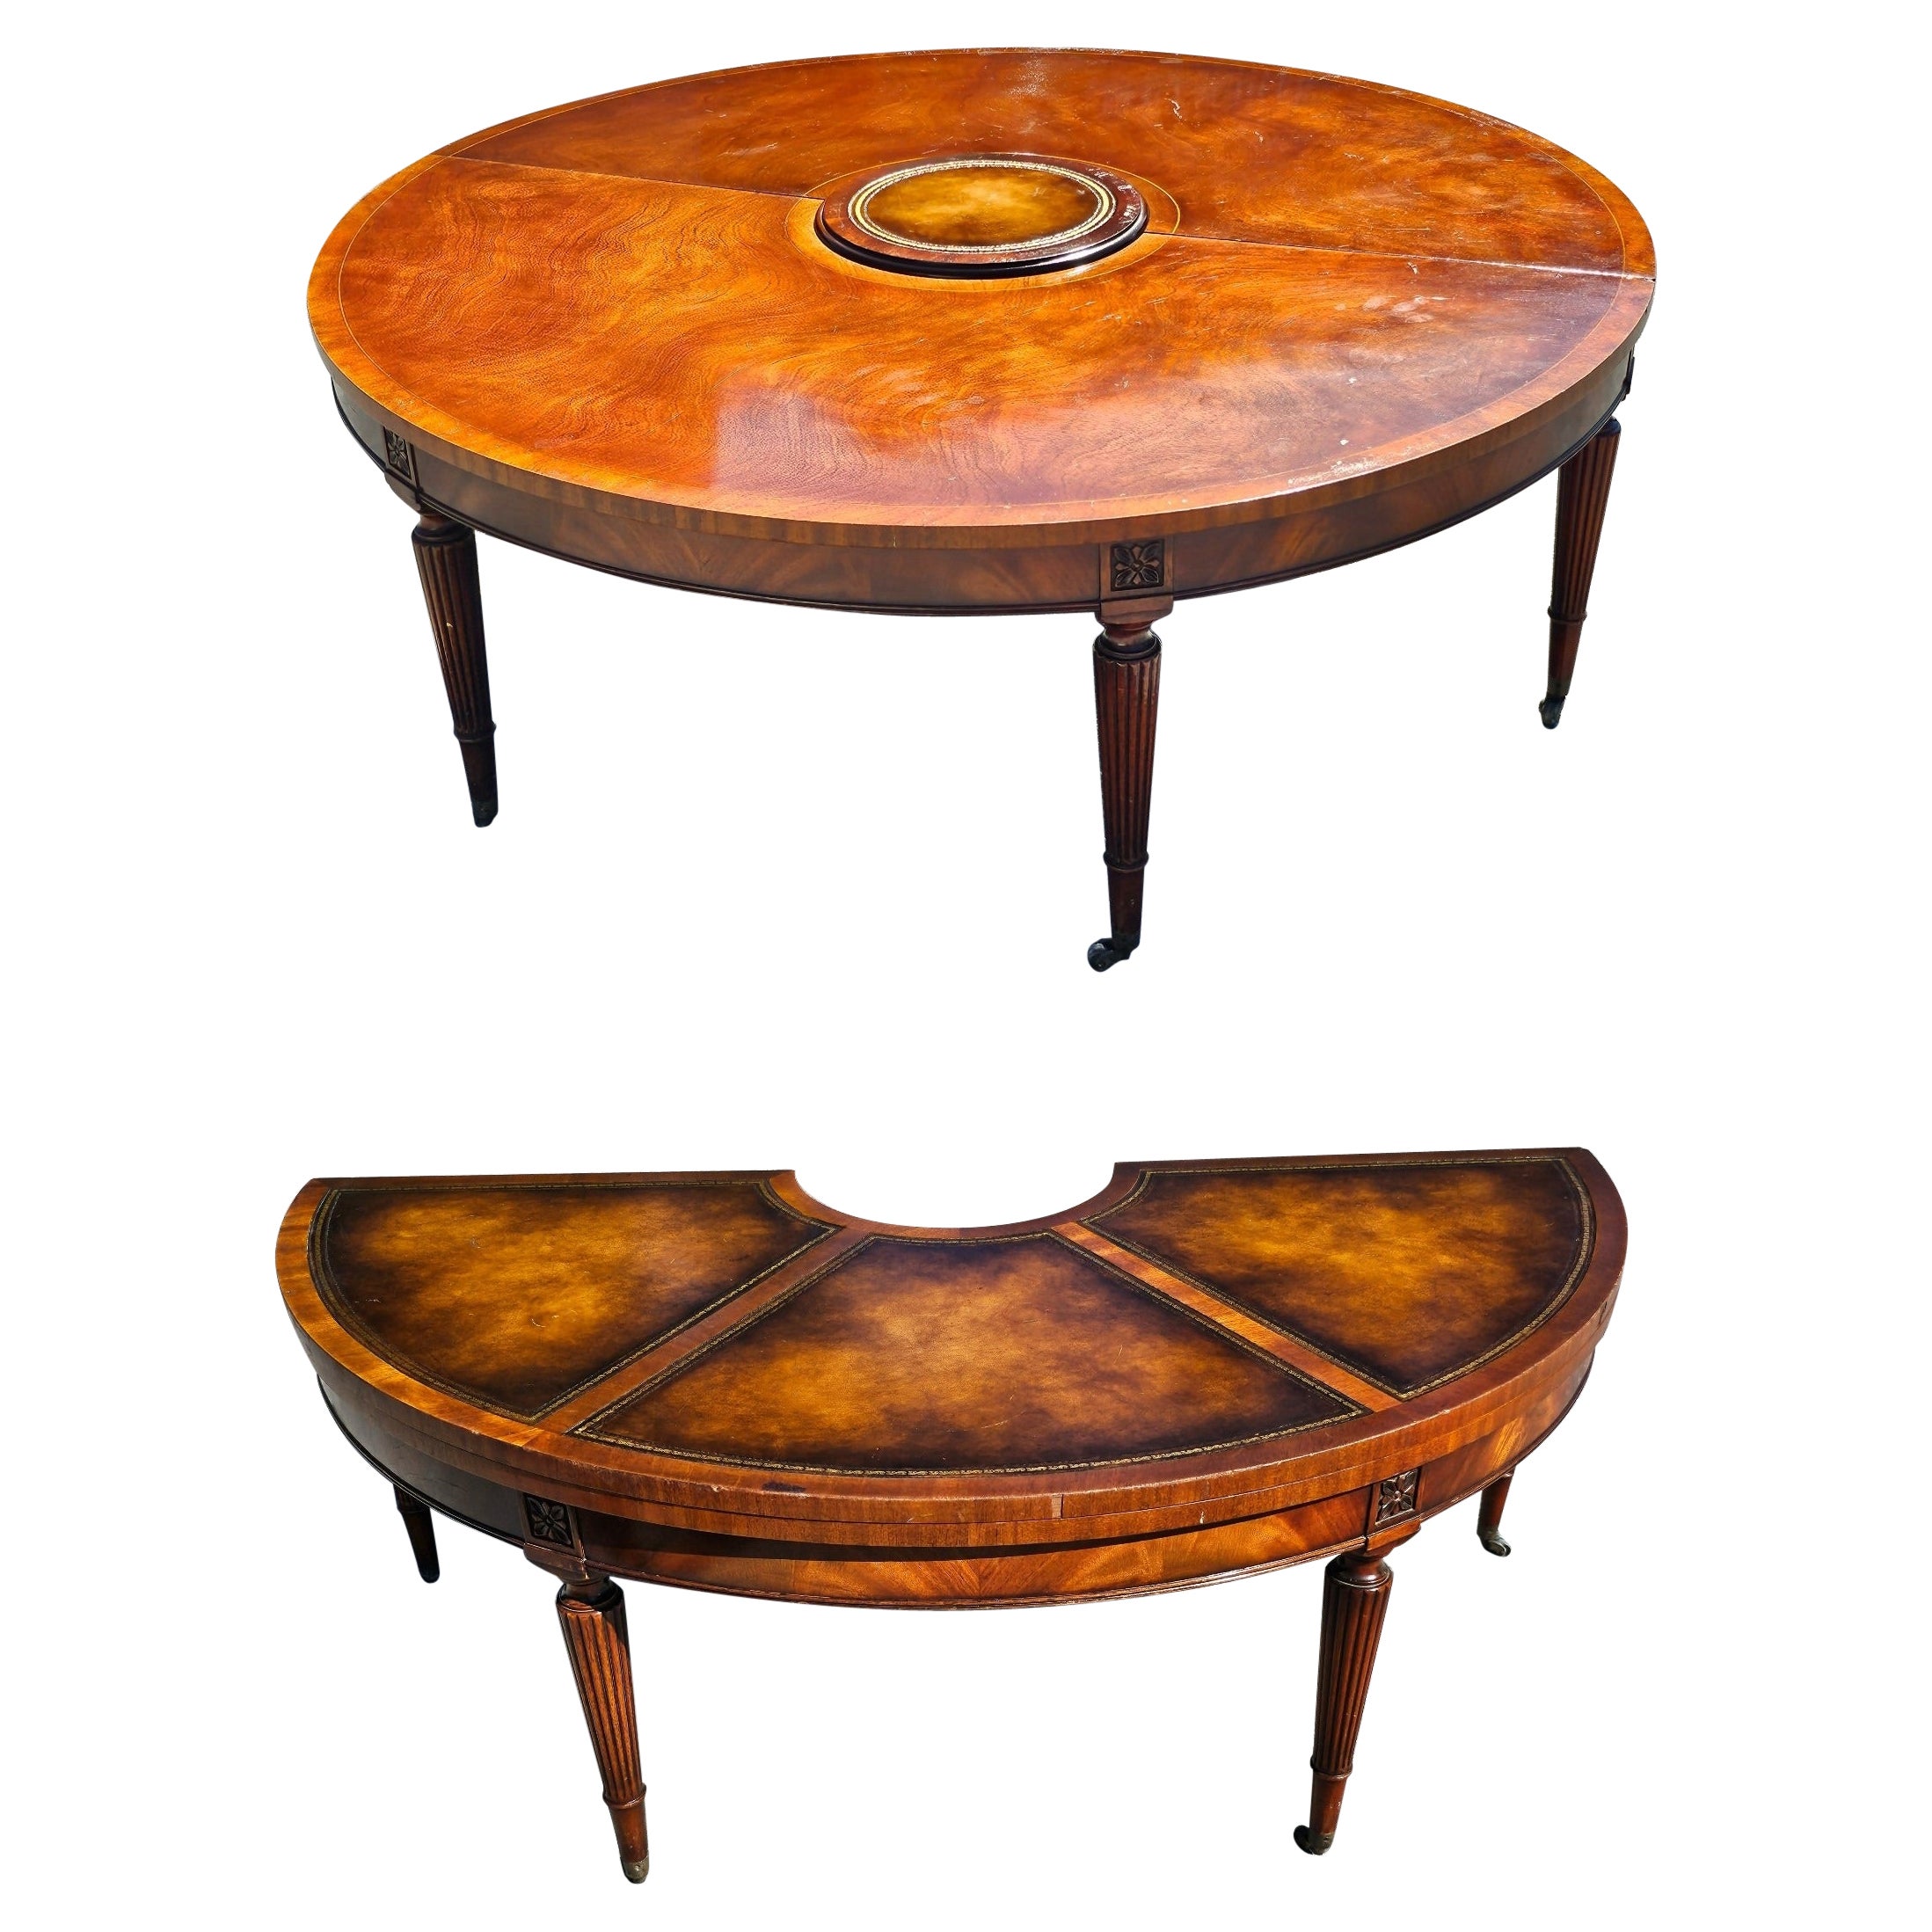 1940er Jahre Weiman Regency Tooled Leather Mahagoni Convertible Demilune Cocktail Table